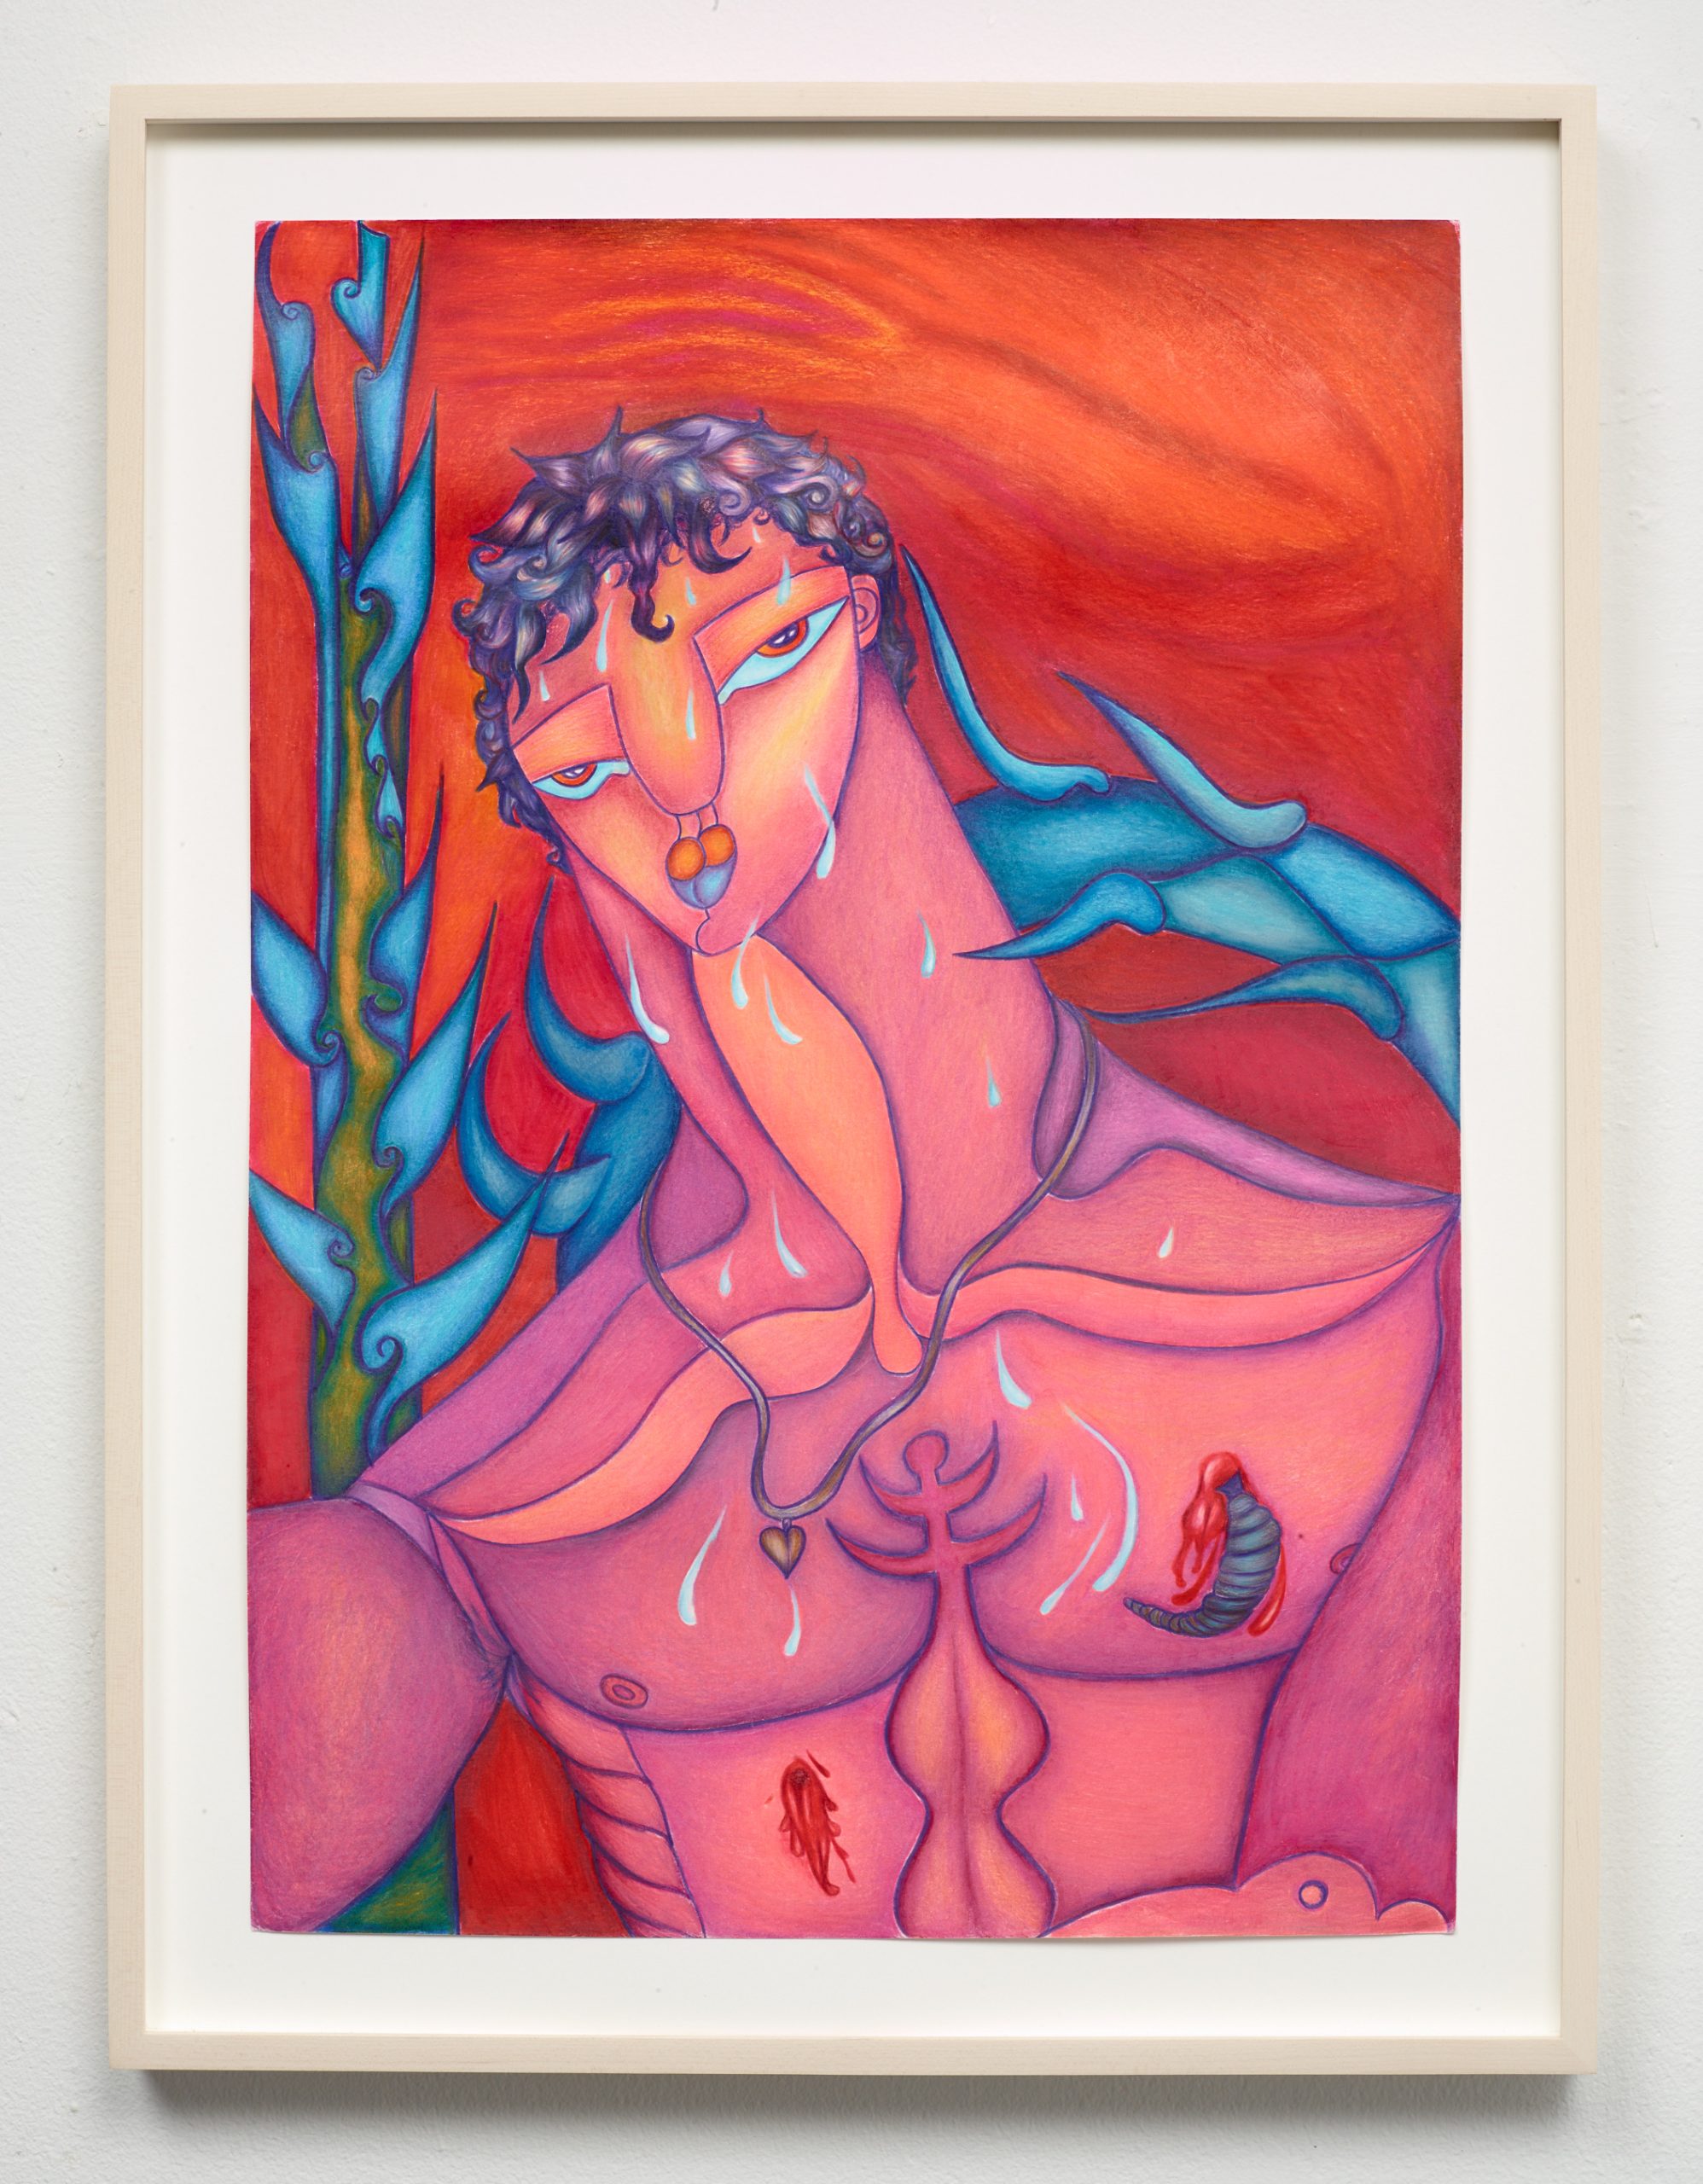 Gut Feelings, 2021, Colored oil pencil on paper, 27 x 20 in (Framed)
Courtesy the artist and Kapp Kapp